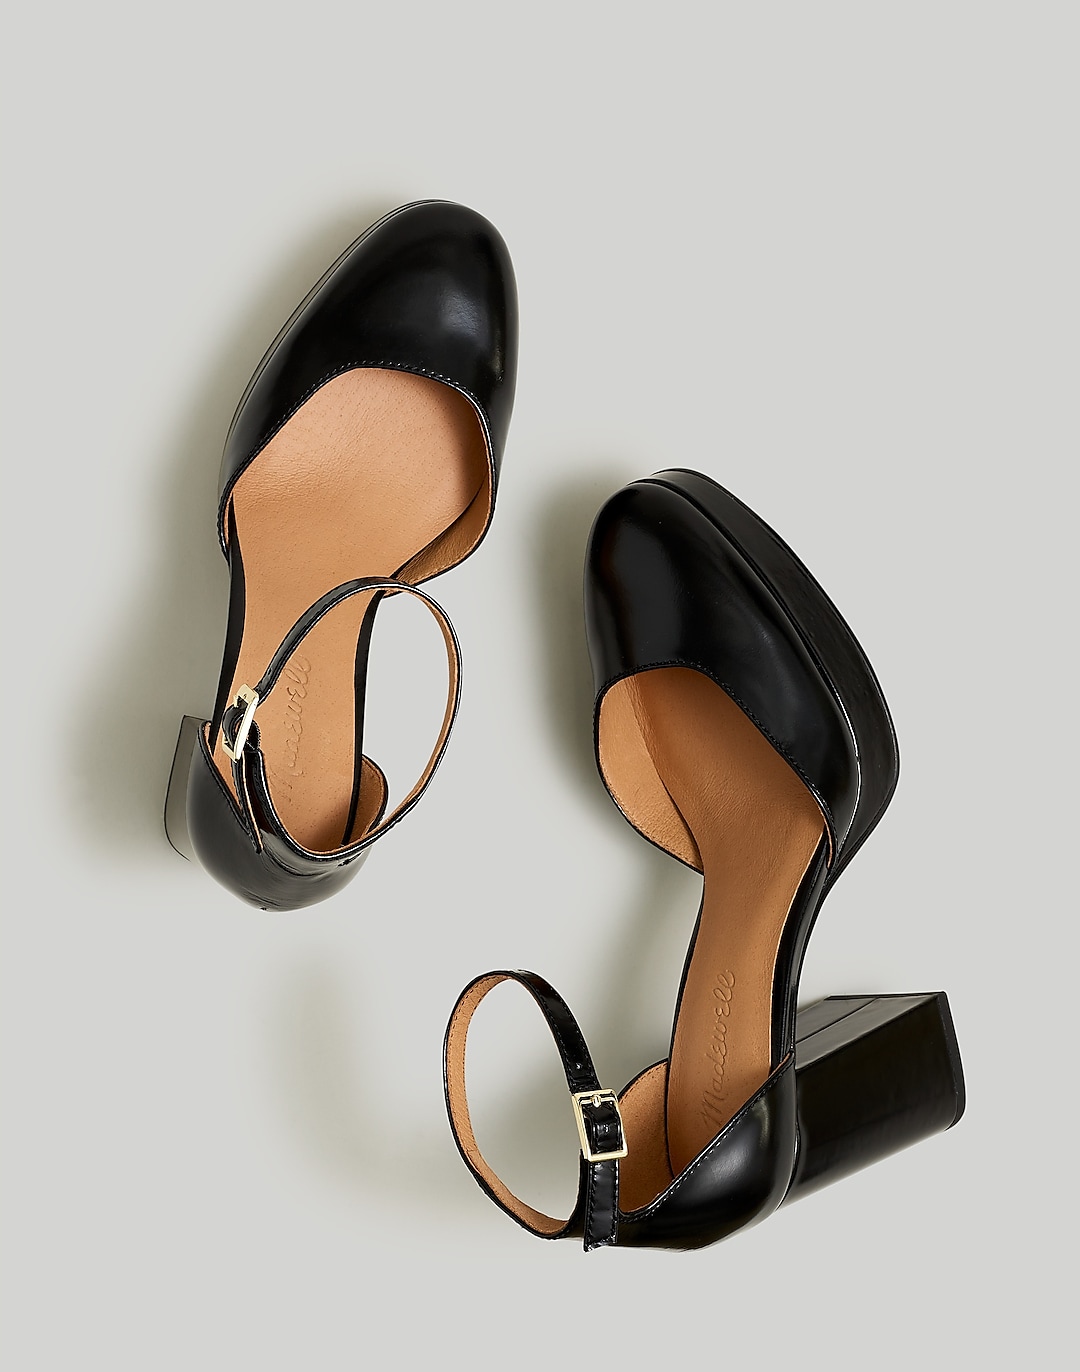 The Mable Ankle-Strap Platform Pump in Leather